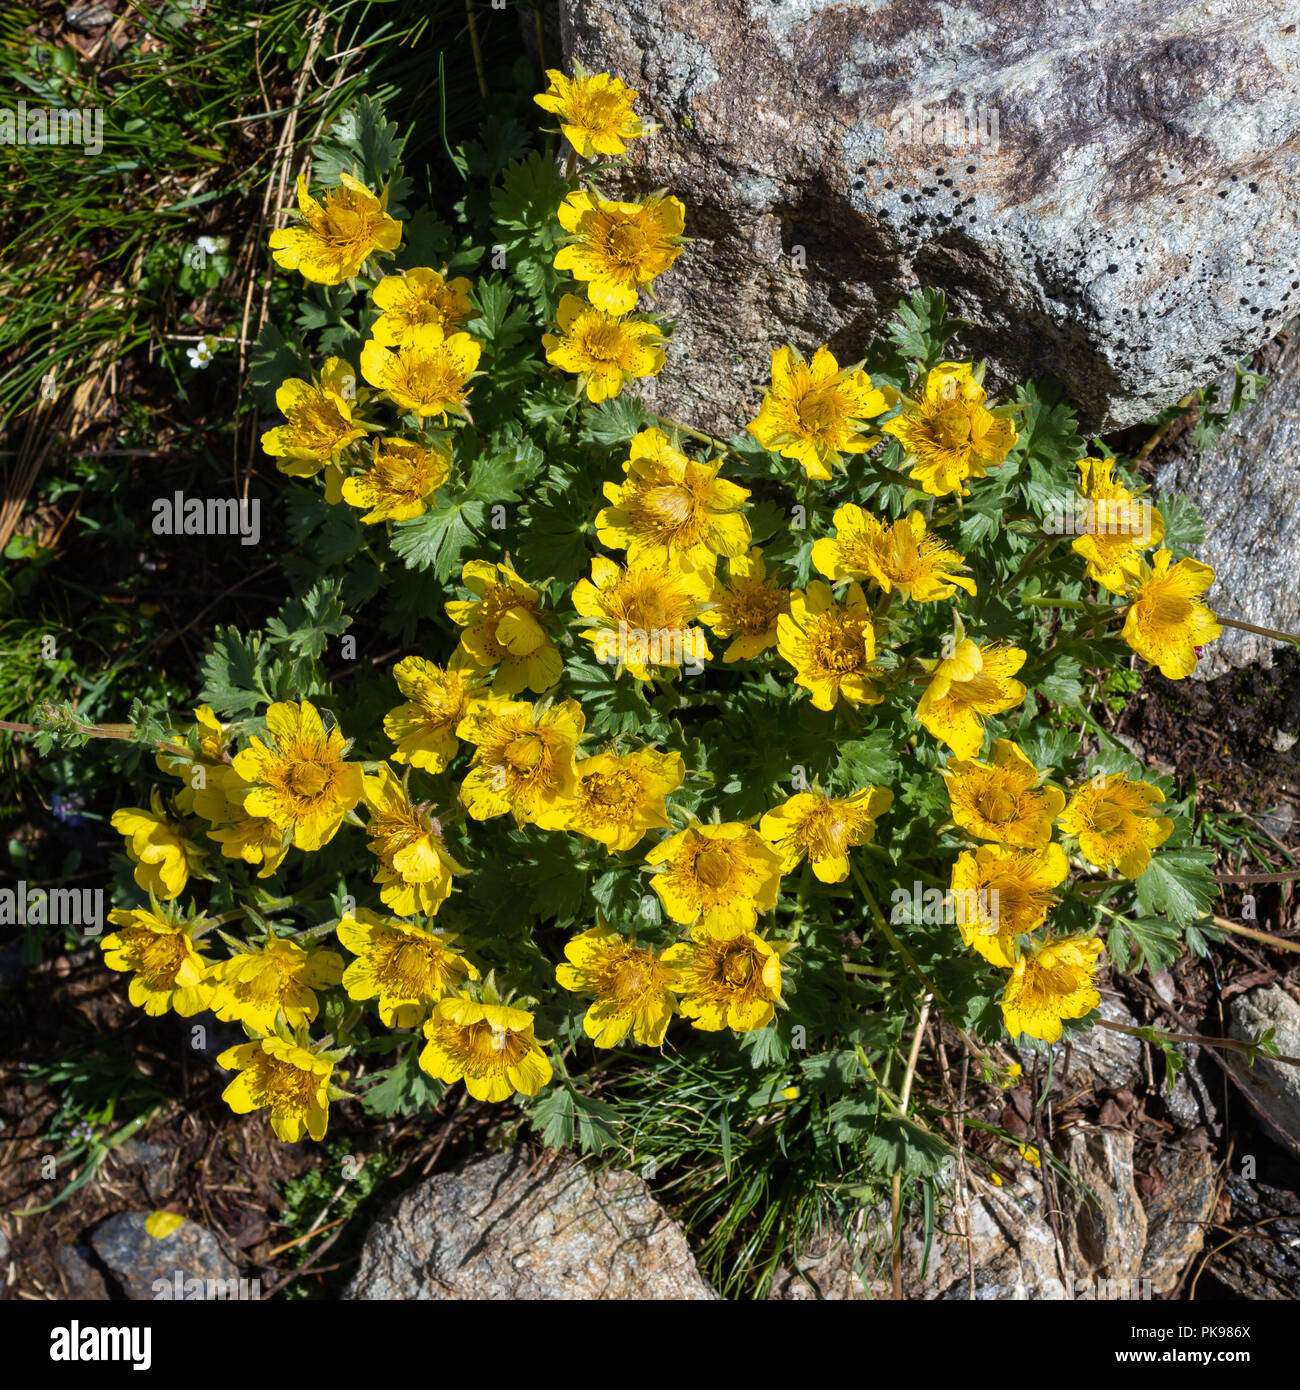 Alpine wild flower Geum Reptans (Creeping Avens). Top view. Photo taken at an altitude of 2500 meters. Stock Photo